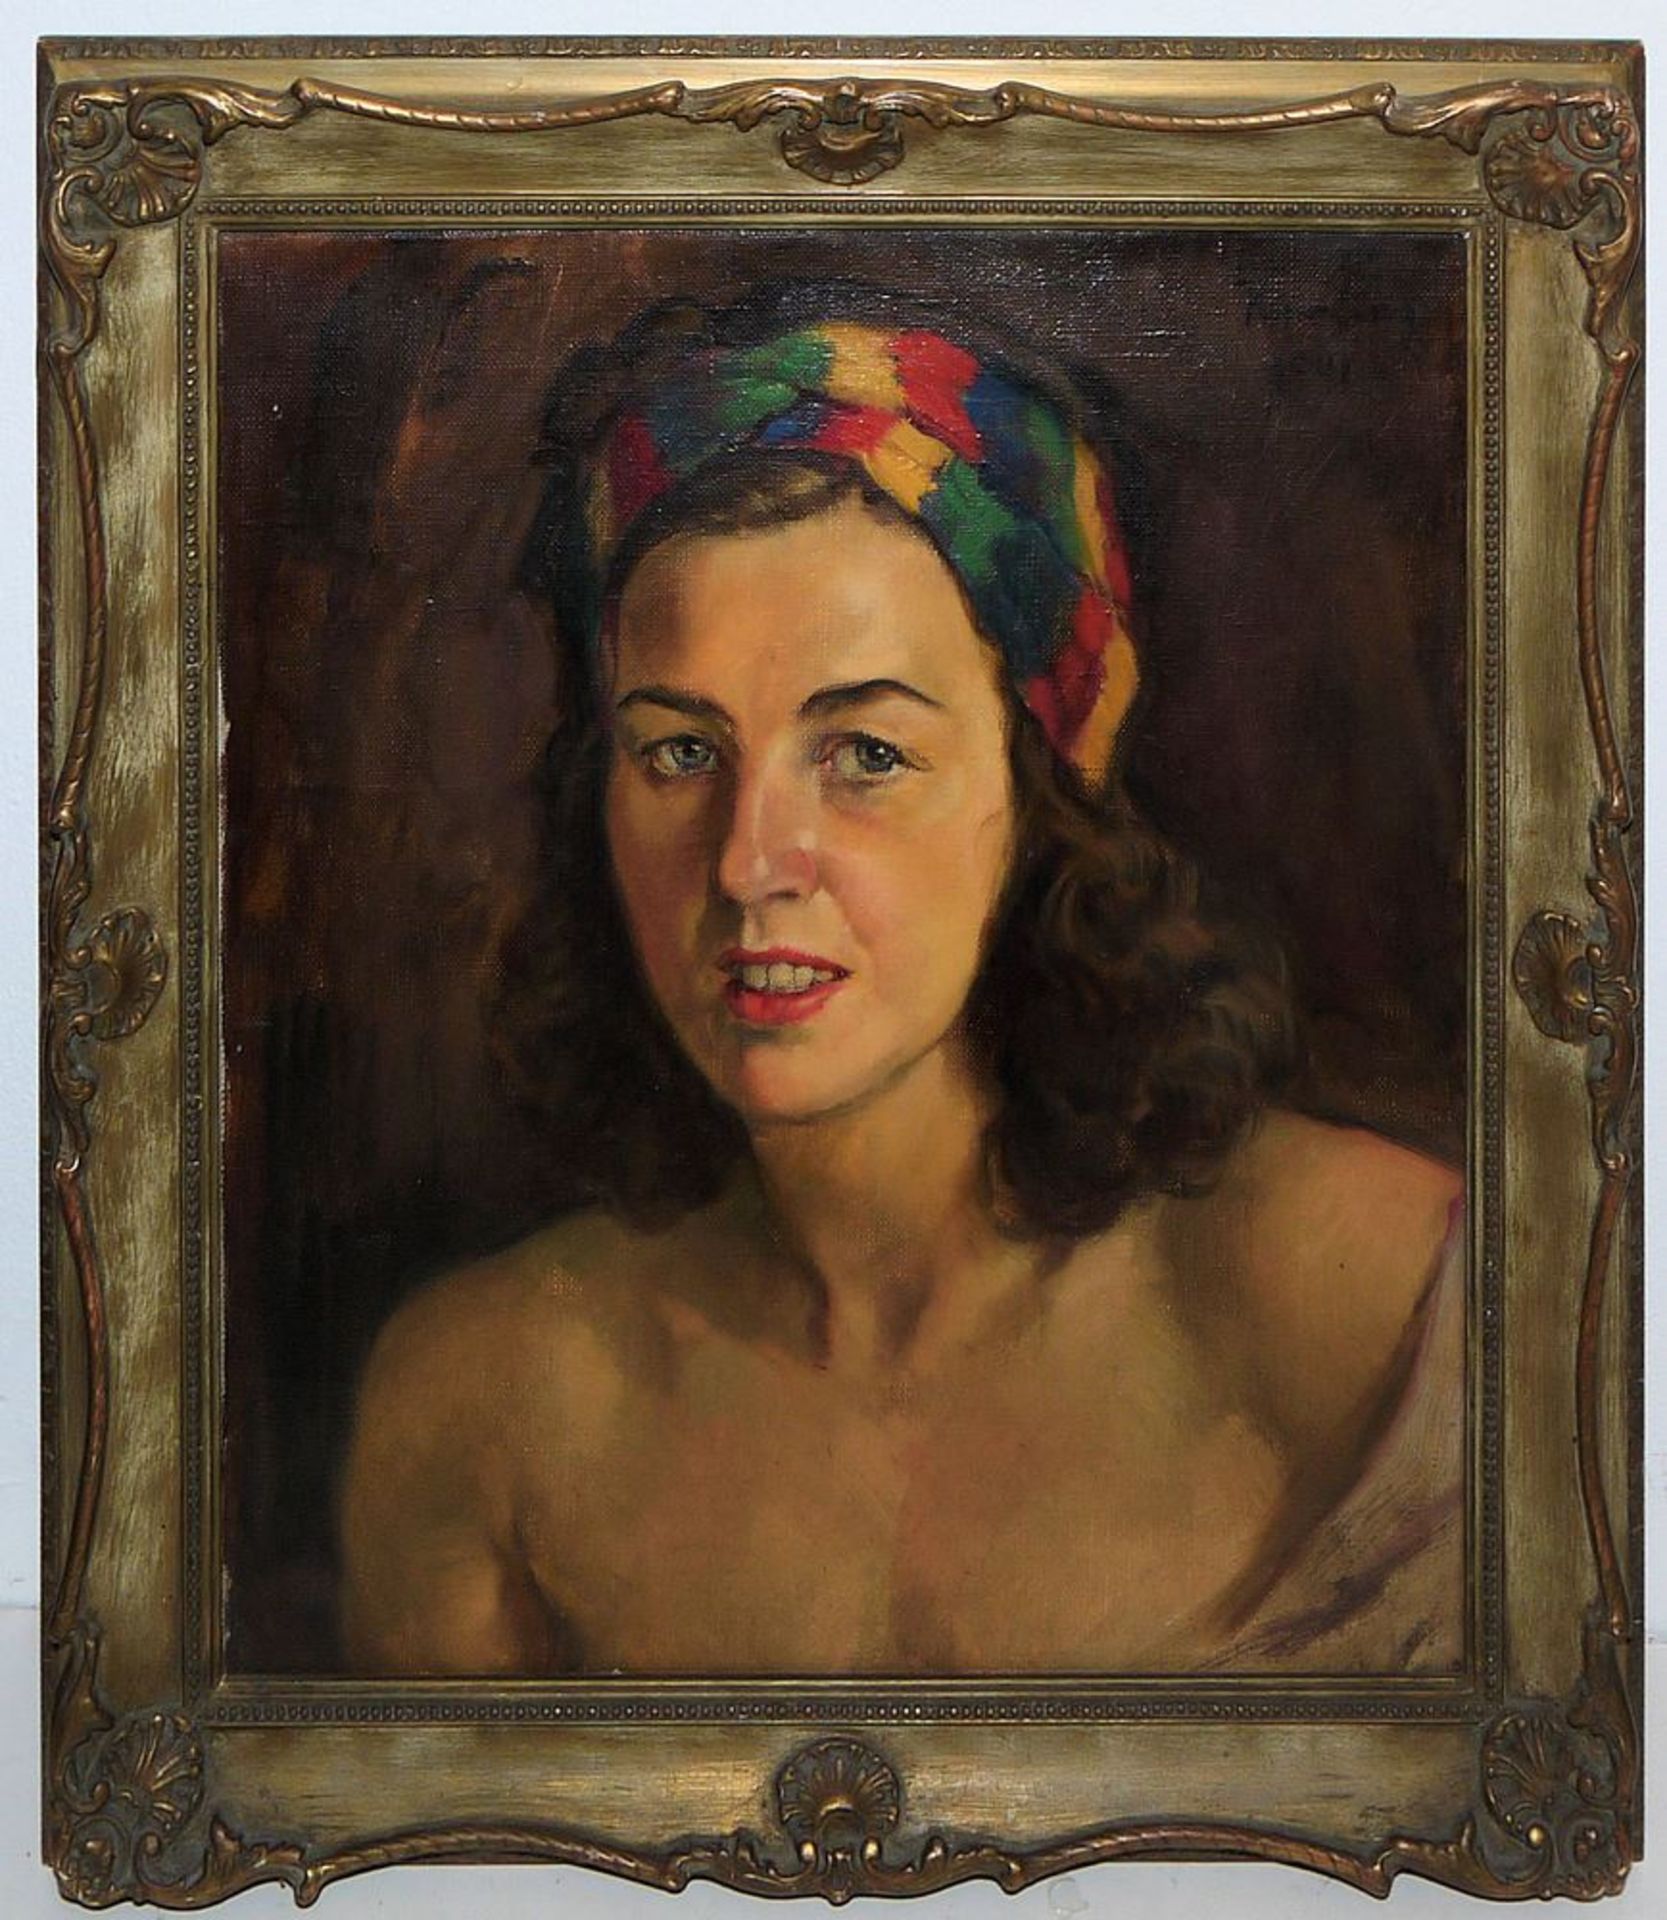 Wilhelm Hempfing, Portrait of a Beautiful Woman with a Colourful Hair Scarf, oil painting from 1941